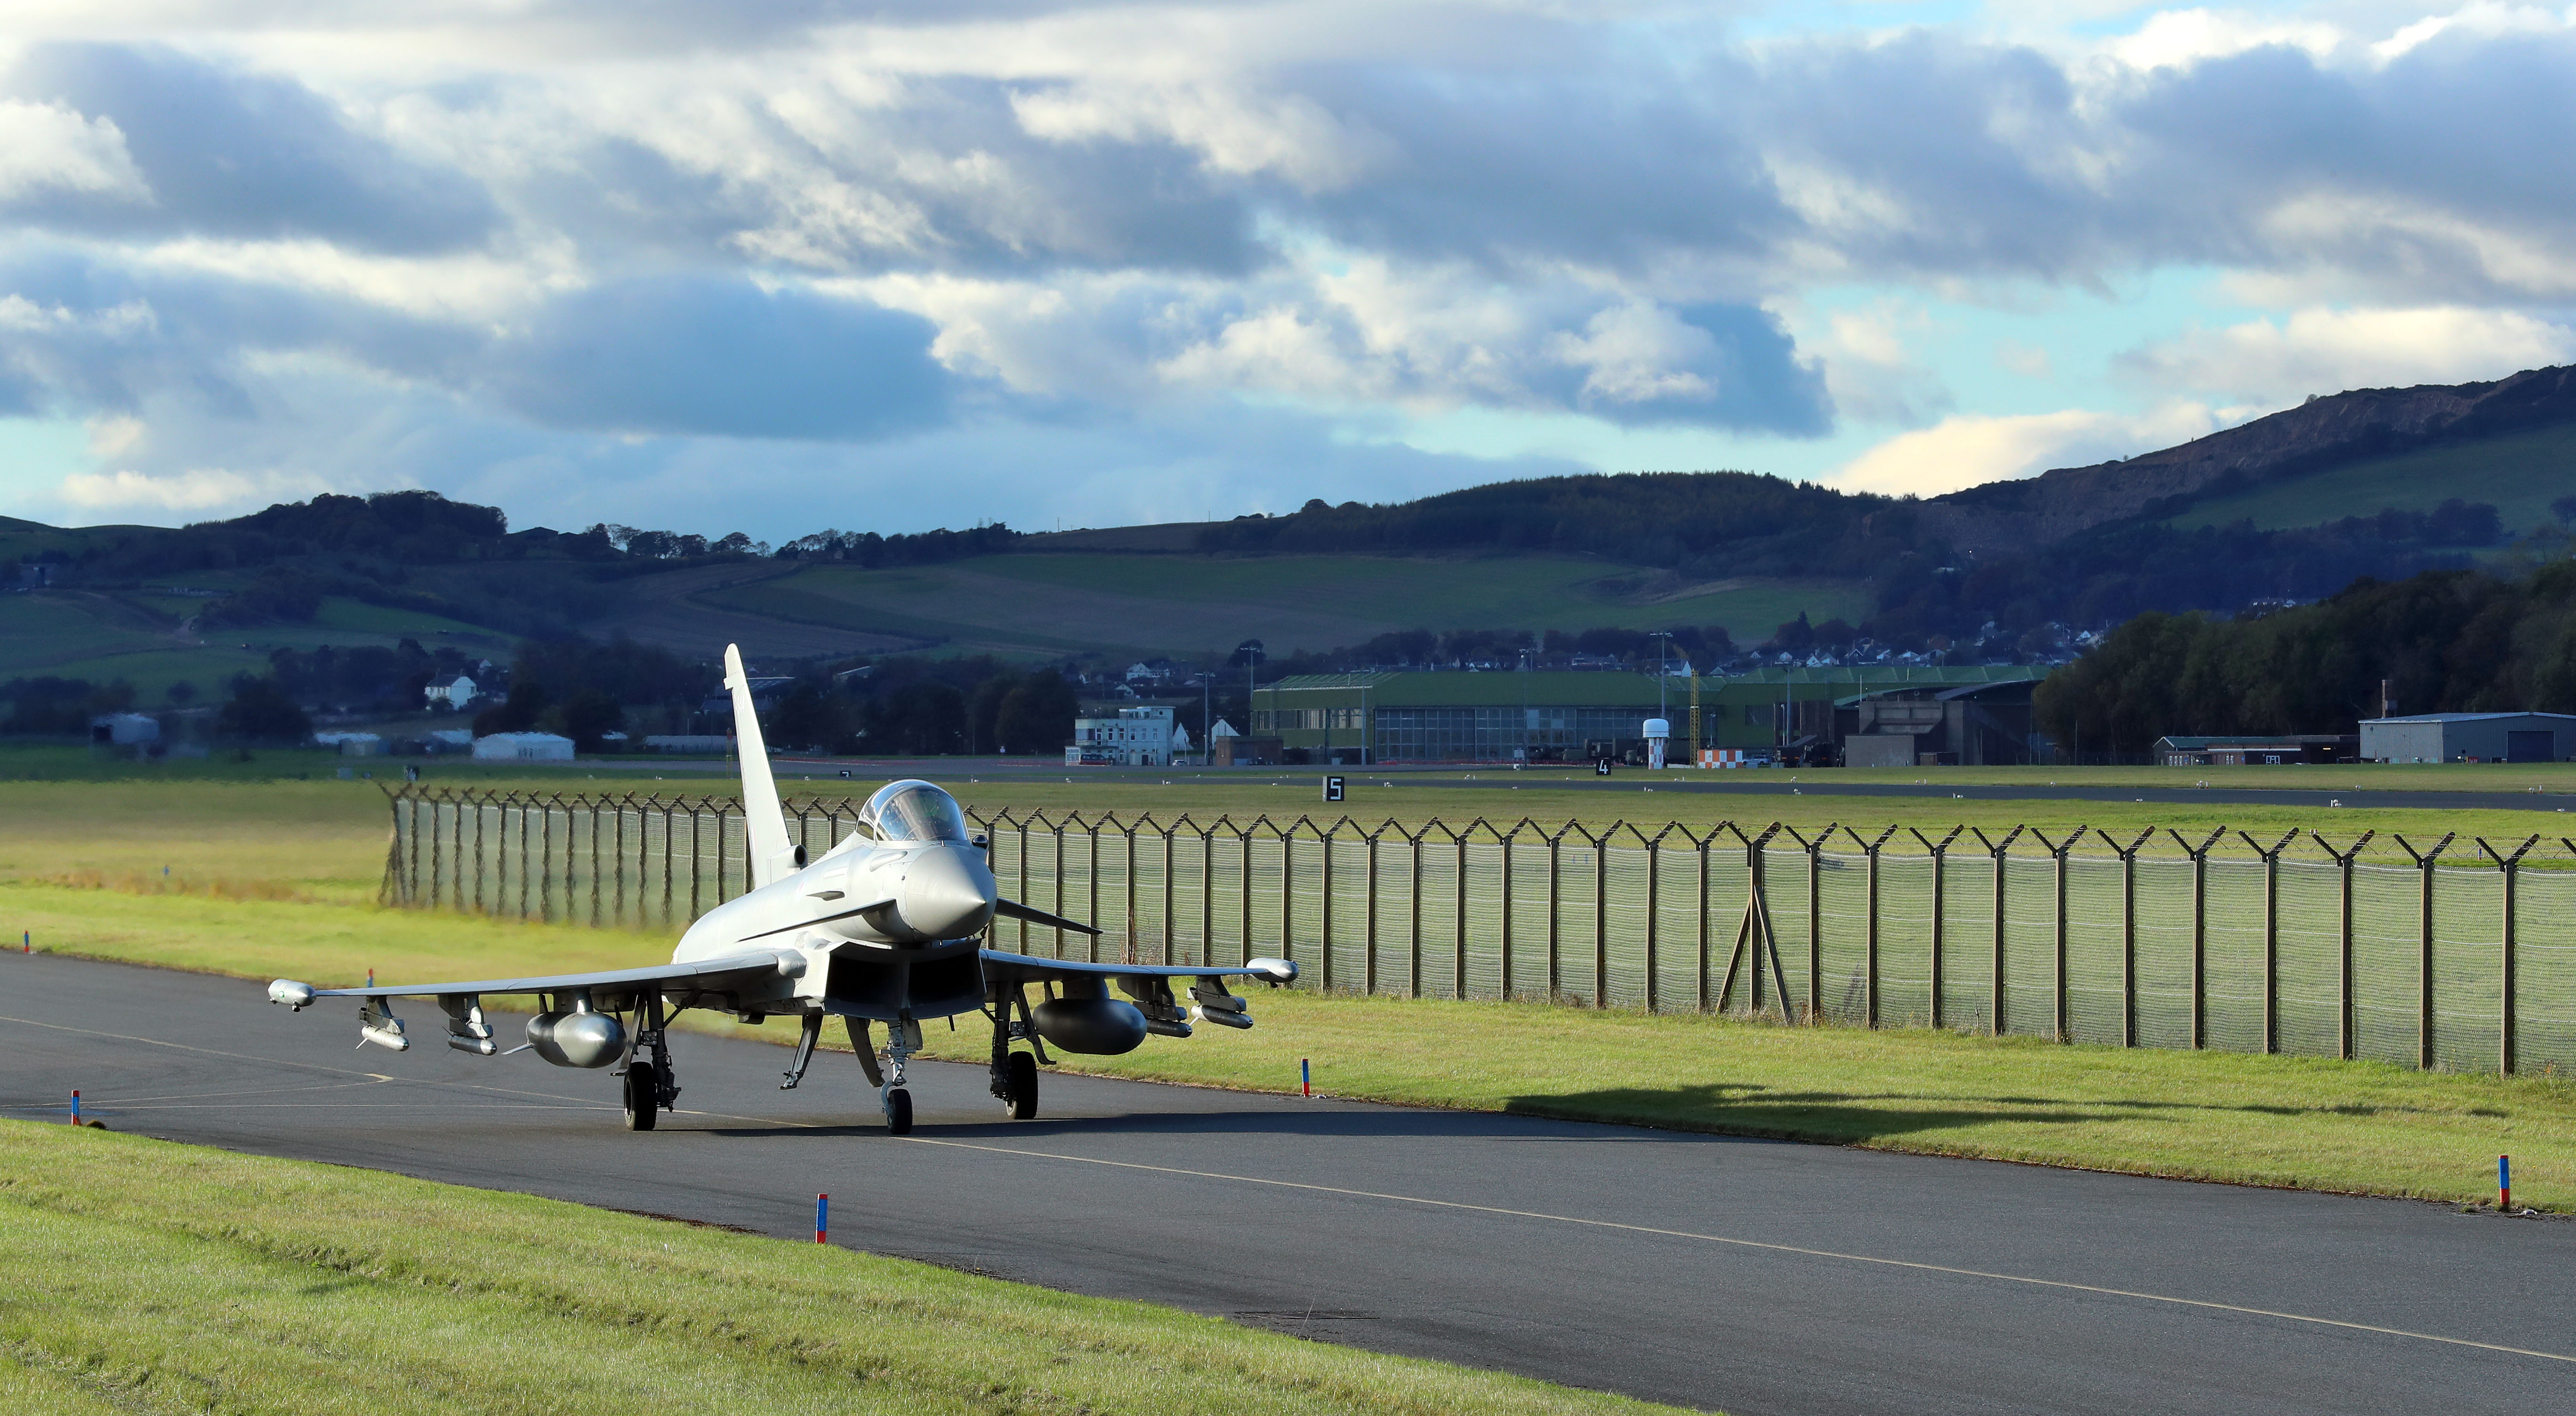 Pictured RAF Typhoon Aircraft - Royal Air Force aircraft and personnel will deploy to Stornoway in the Outer Hebrides this week in a major exercise to develop the future Agile Combat Employment (ACE) concept.